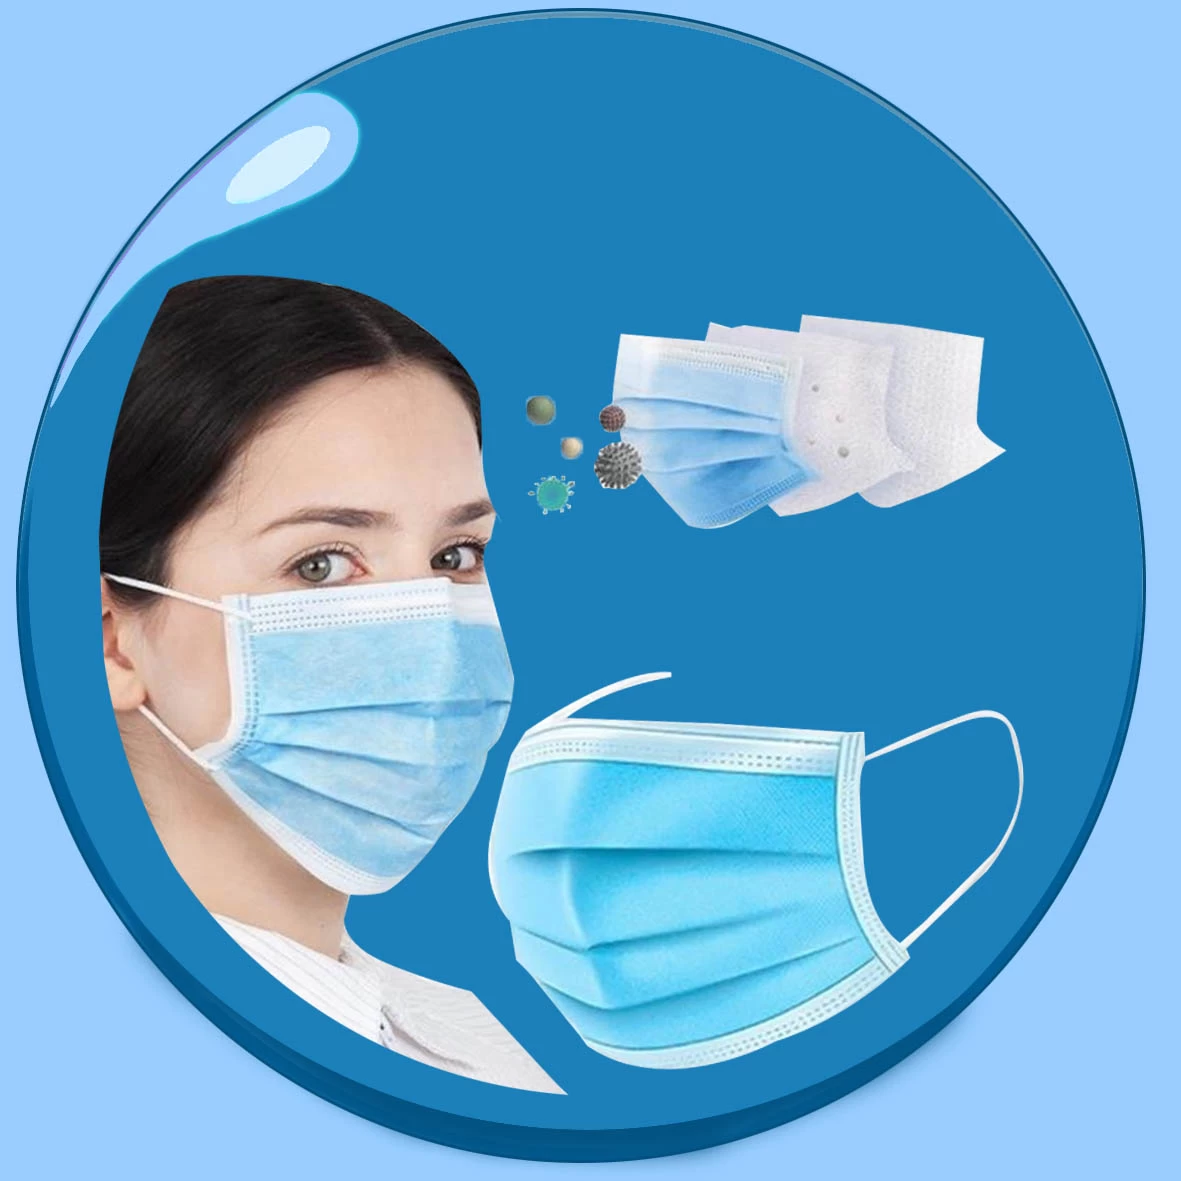 China Hygienic Products Against COVID19 manufacturer